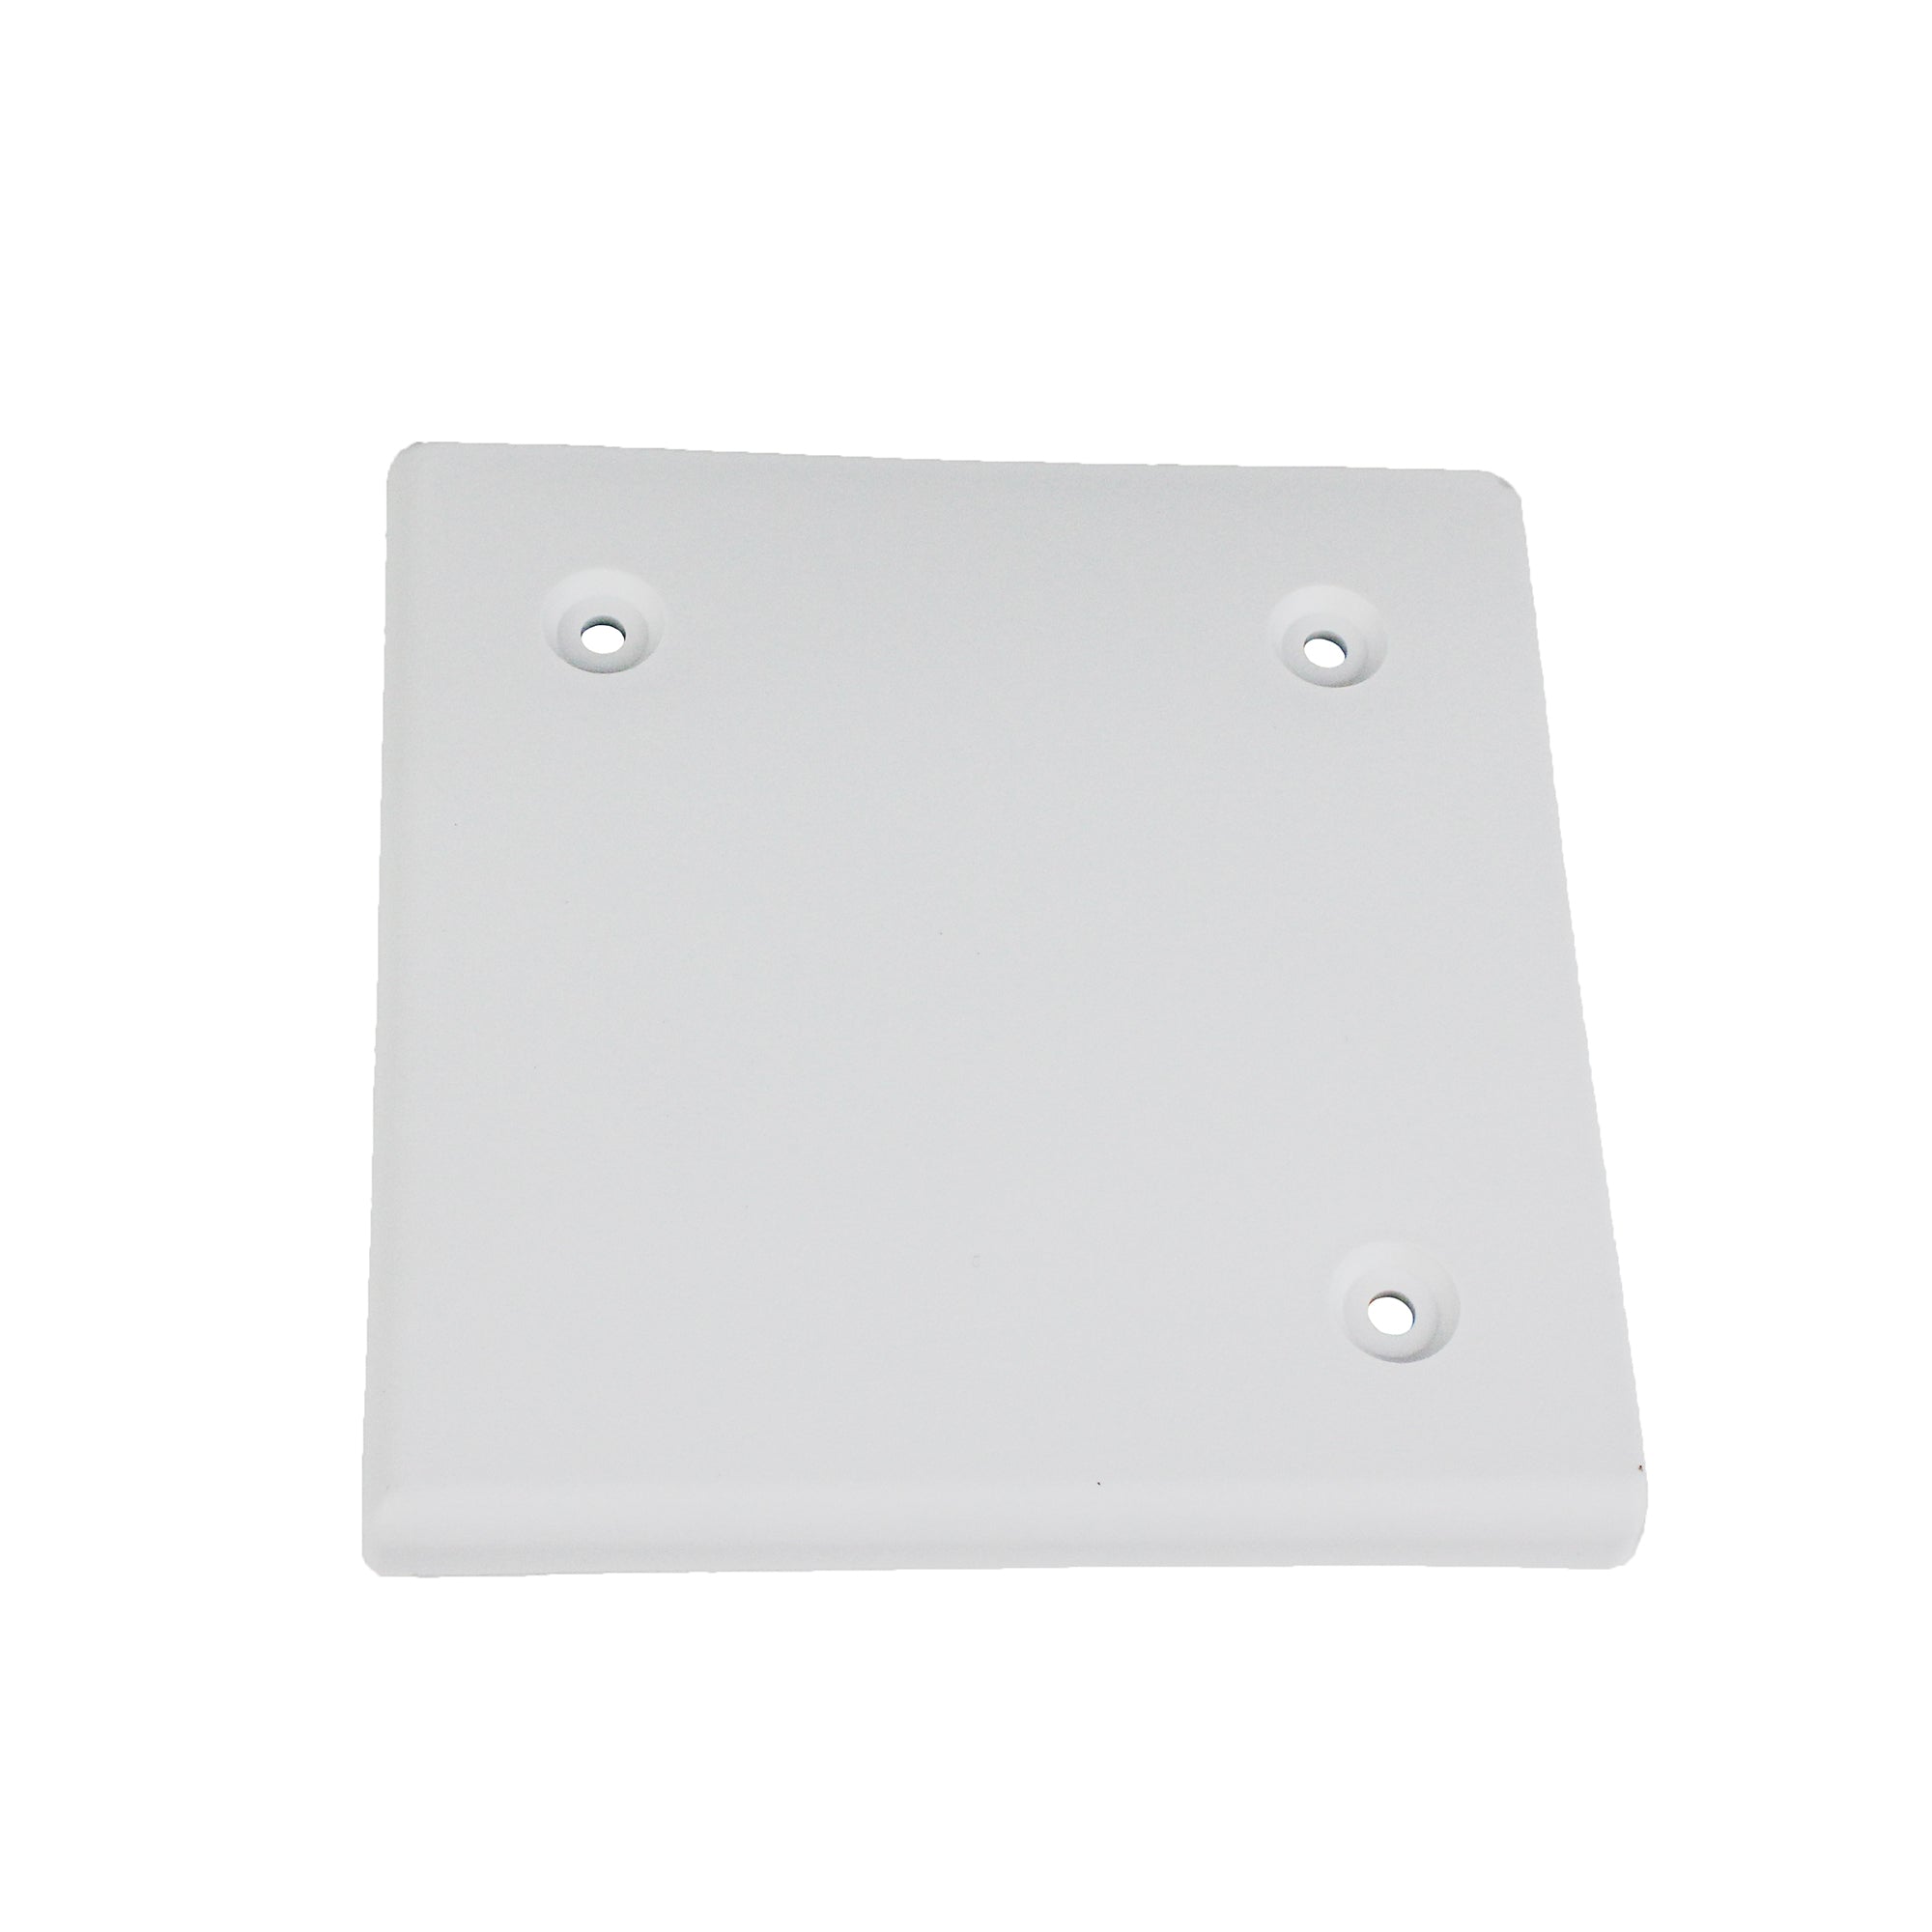 Thetford B&B Molders 94285 (547) White Square Slide-Out Extrusion Cover